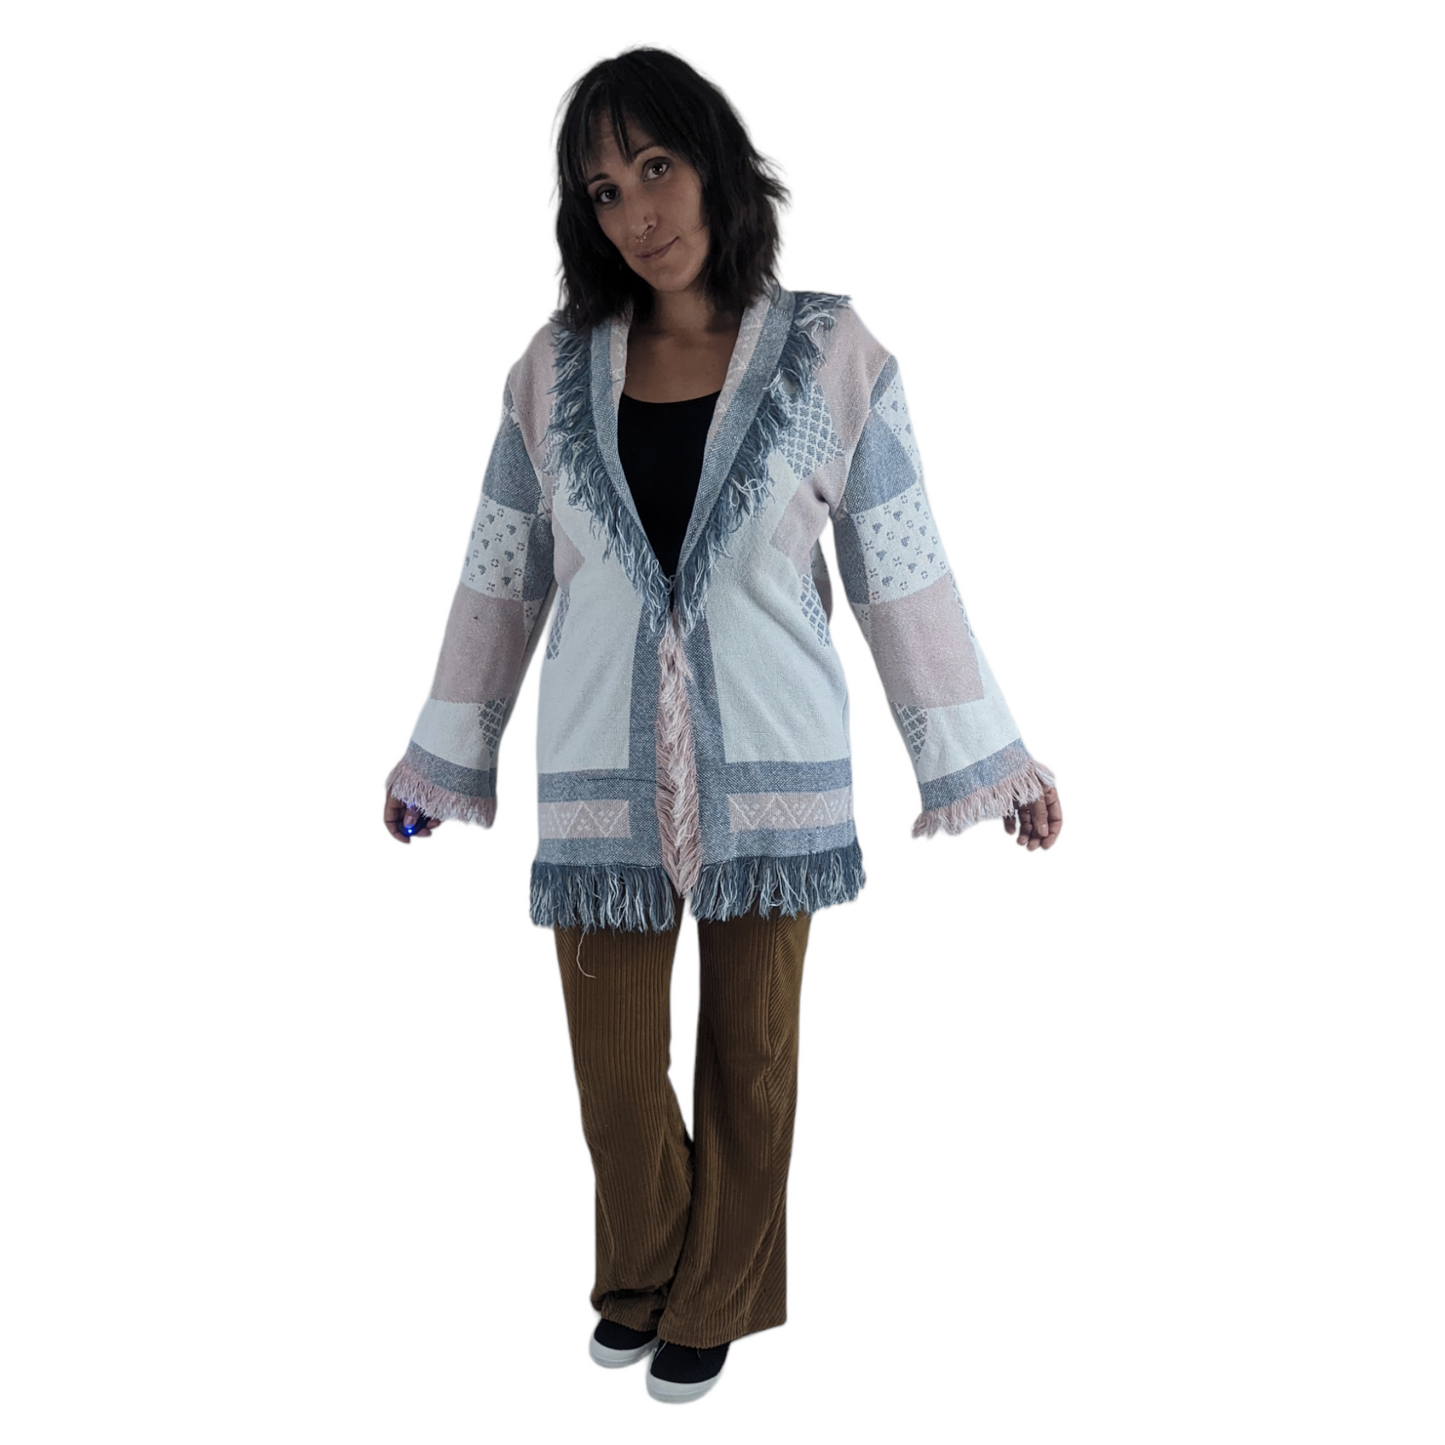 front view of woman wearing woven tapestry blanket coat.